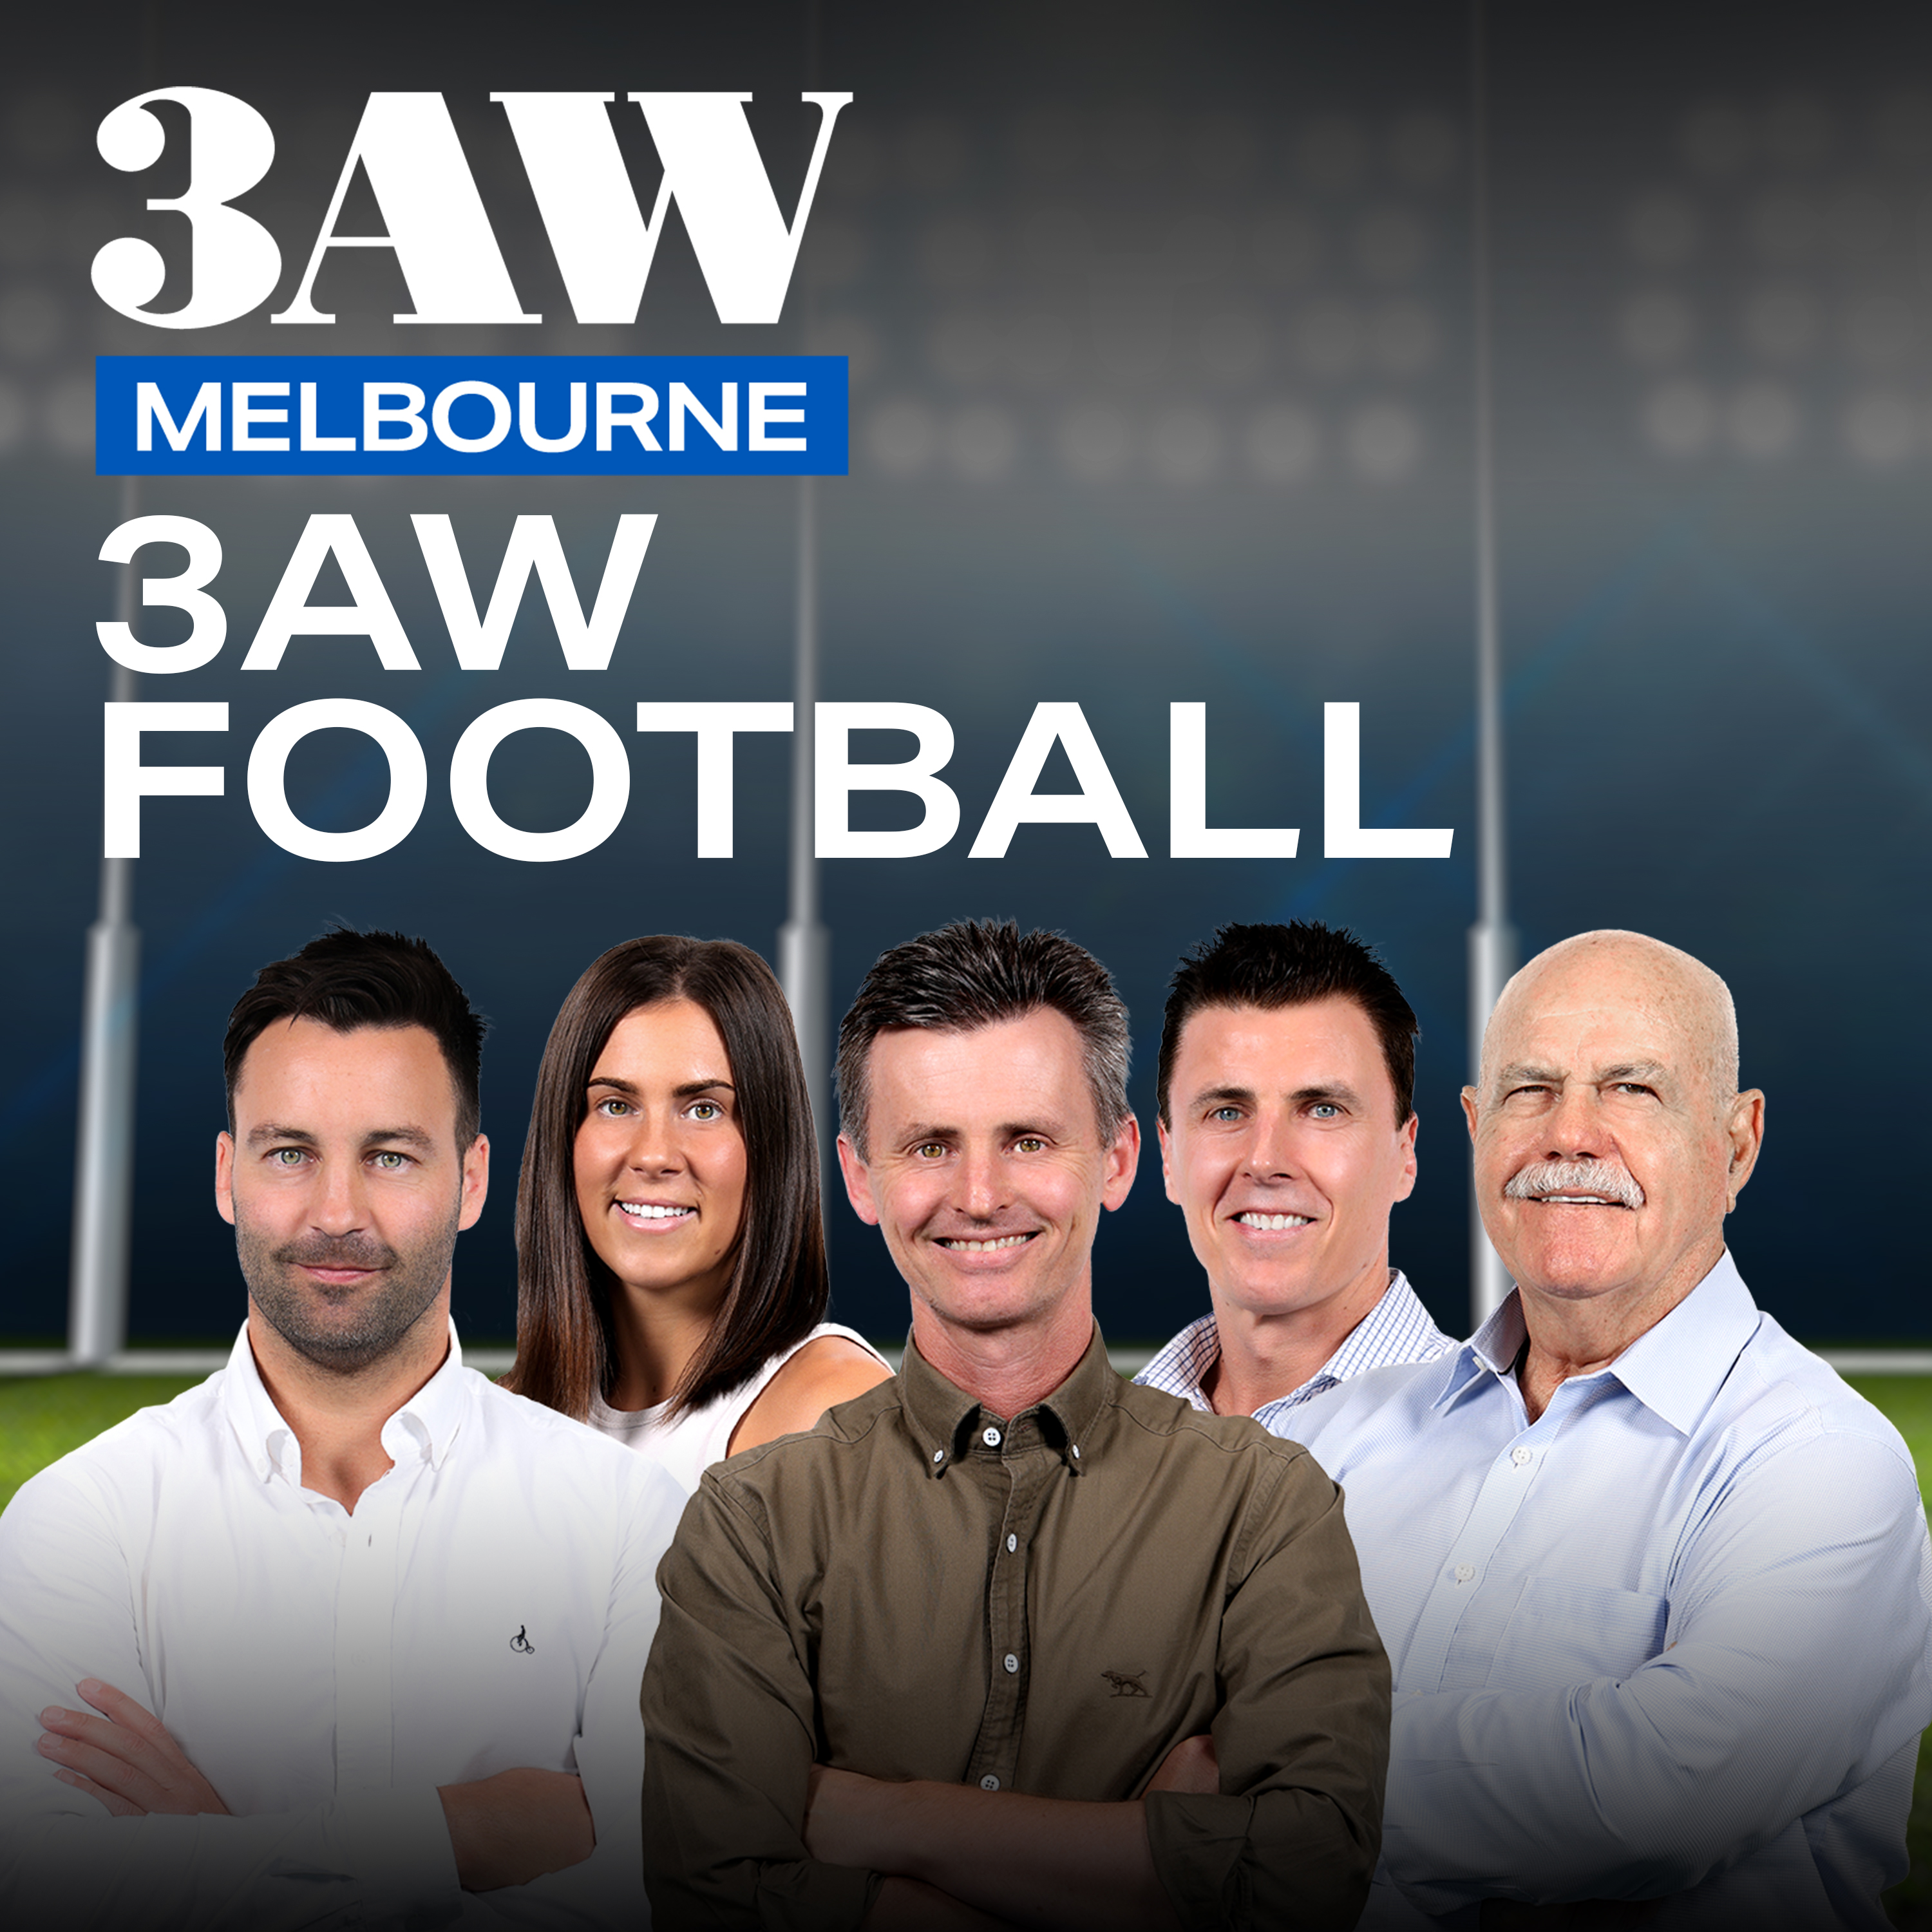 3AW's call team clips St Kilda after a lacklustre opening term